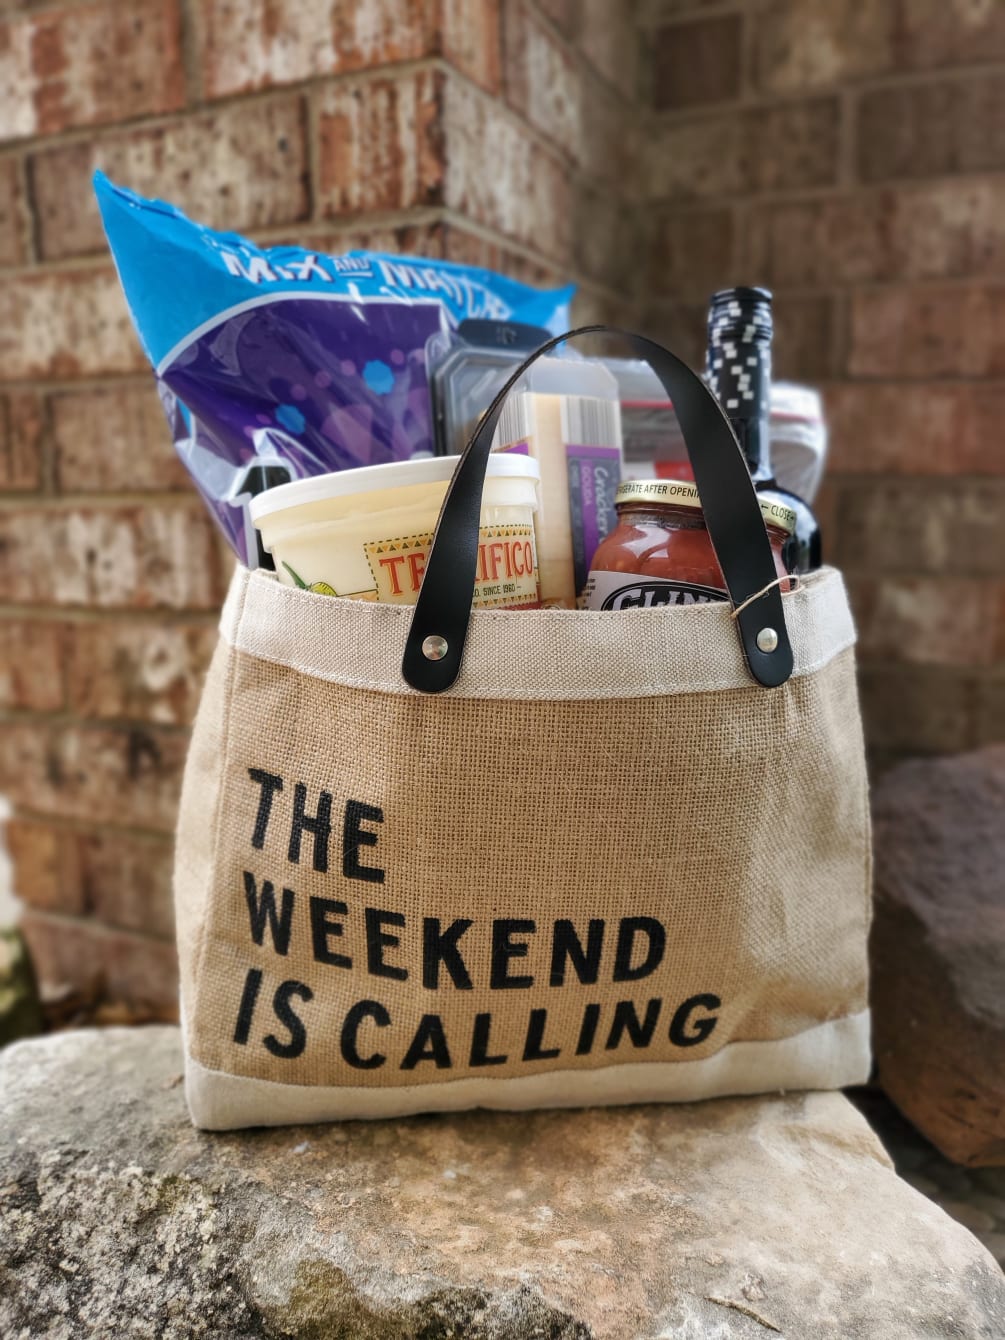 ***THIS PRODUCT REQUIRES 24 HOUR NOTICE *** 
The perfect weekend snack bag